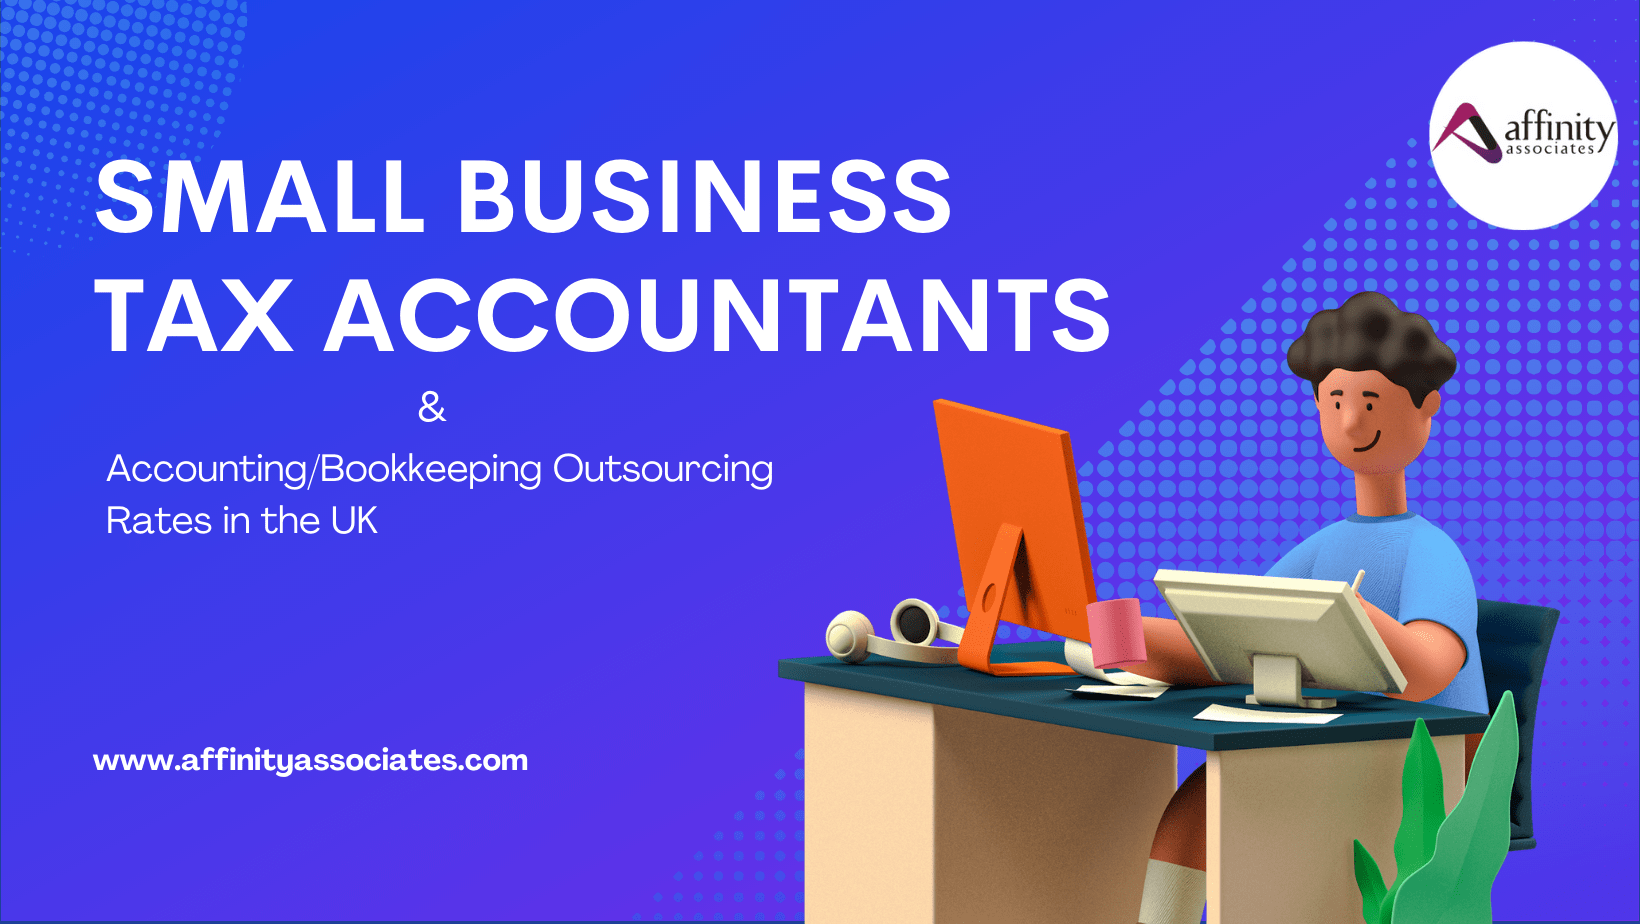 Small Business Tax Accountants and Accounting/Bookkeeping Outsourcing Rates in the UK